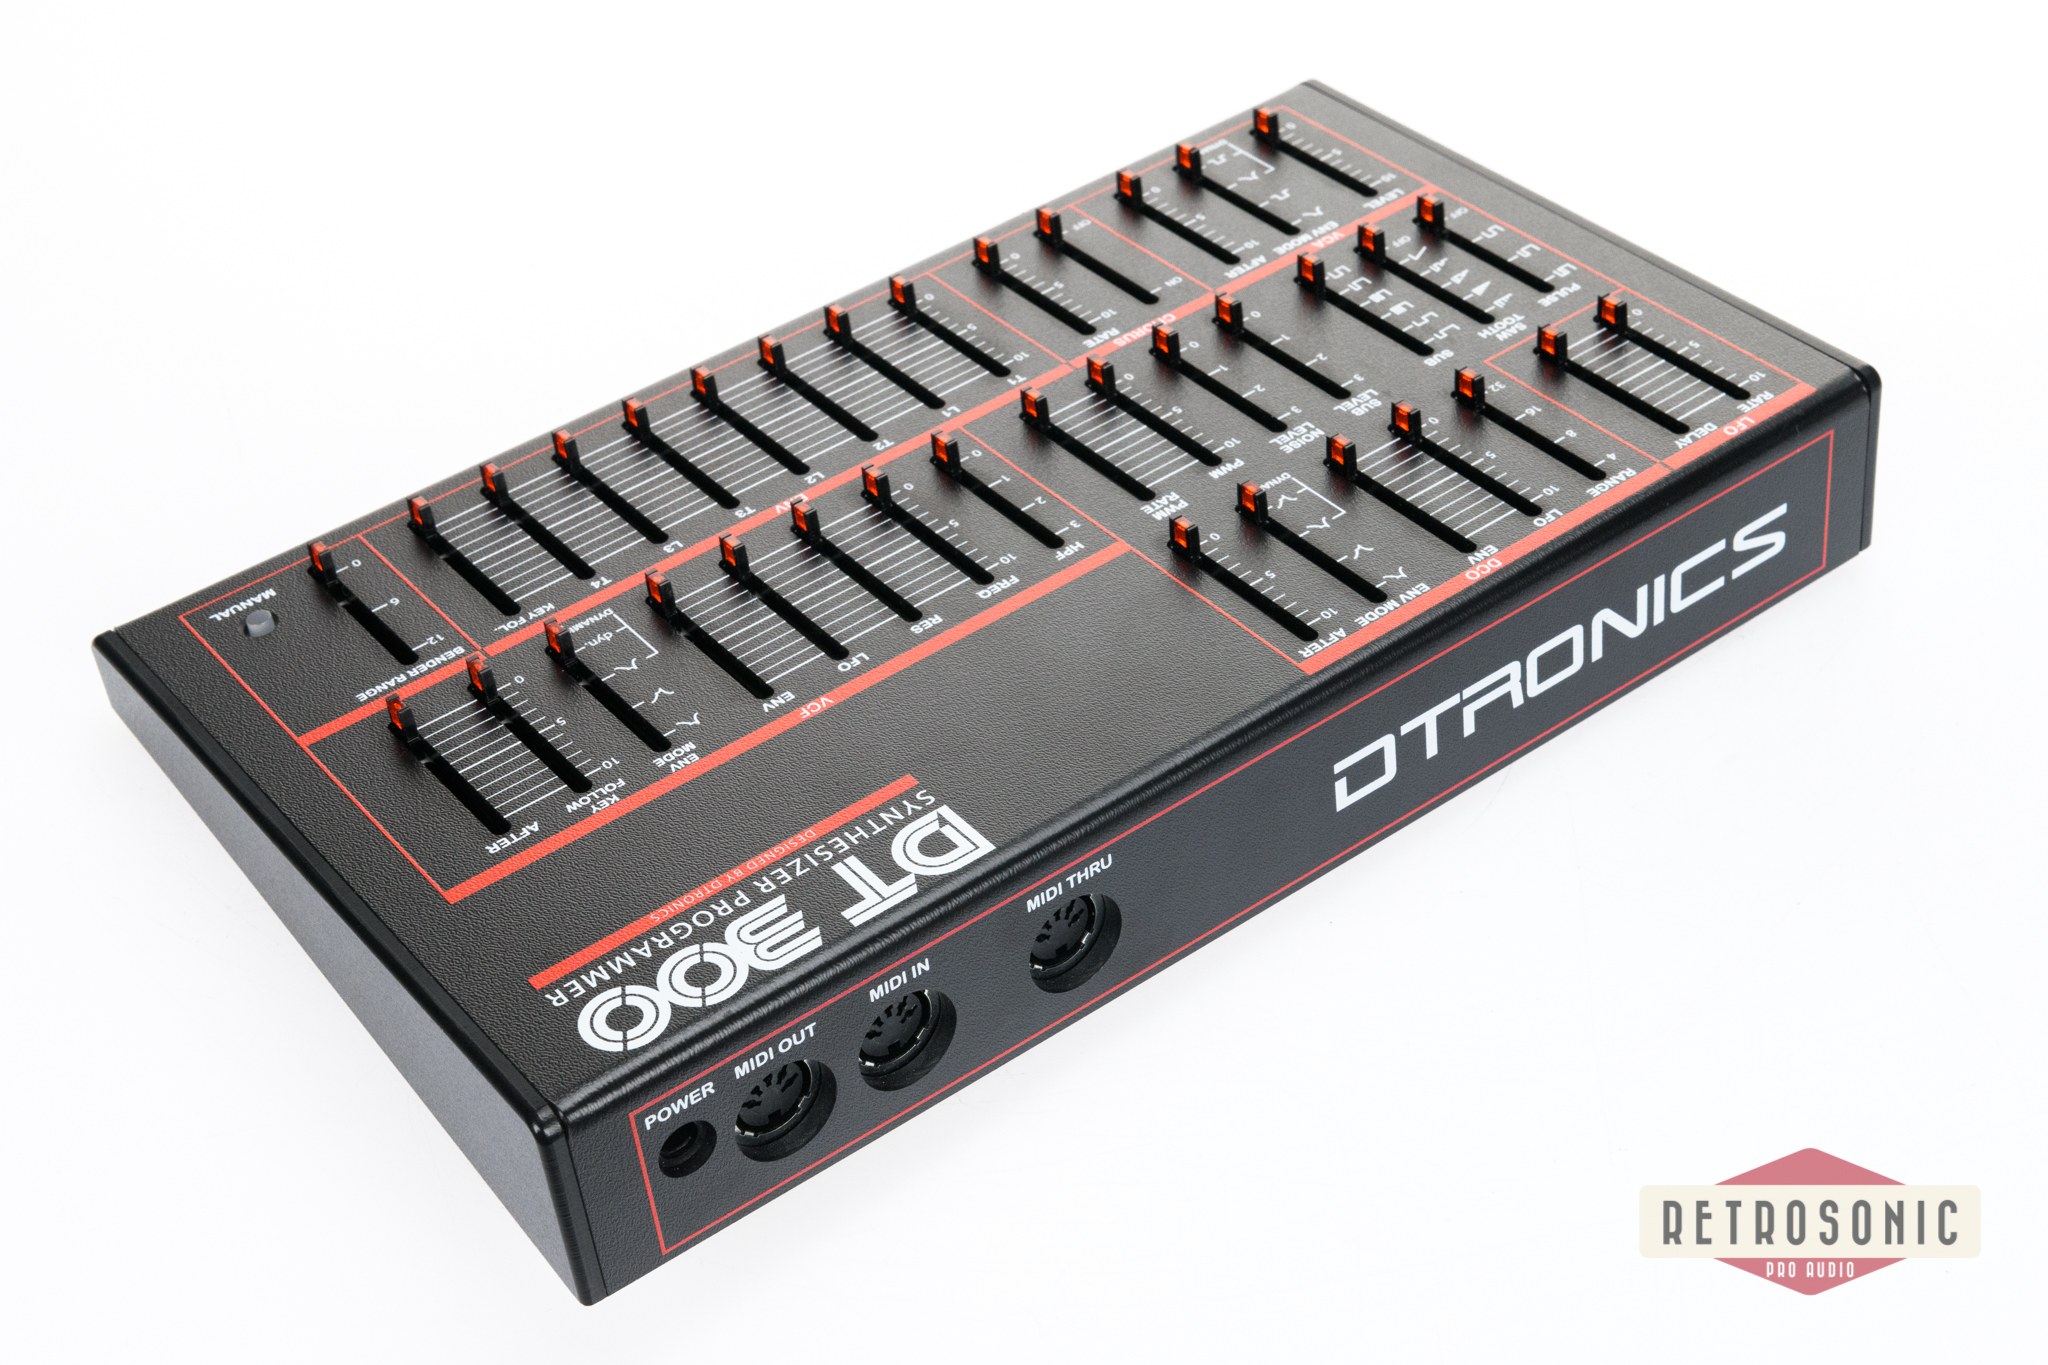 Dtronics DT-300 Controller for Alpha Juno 1, 2 and MKS-50 synthesizers